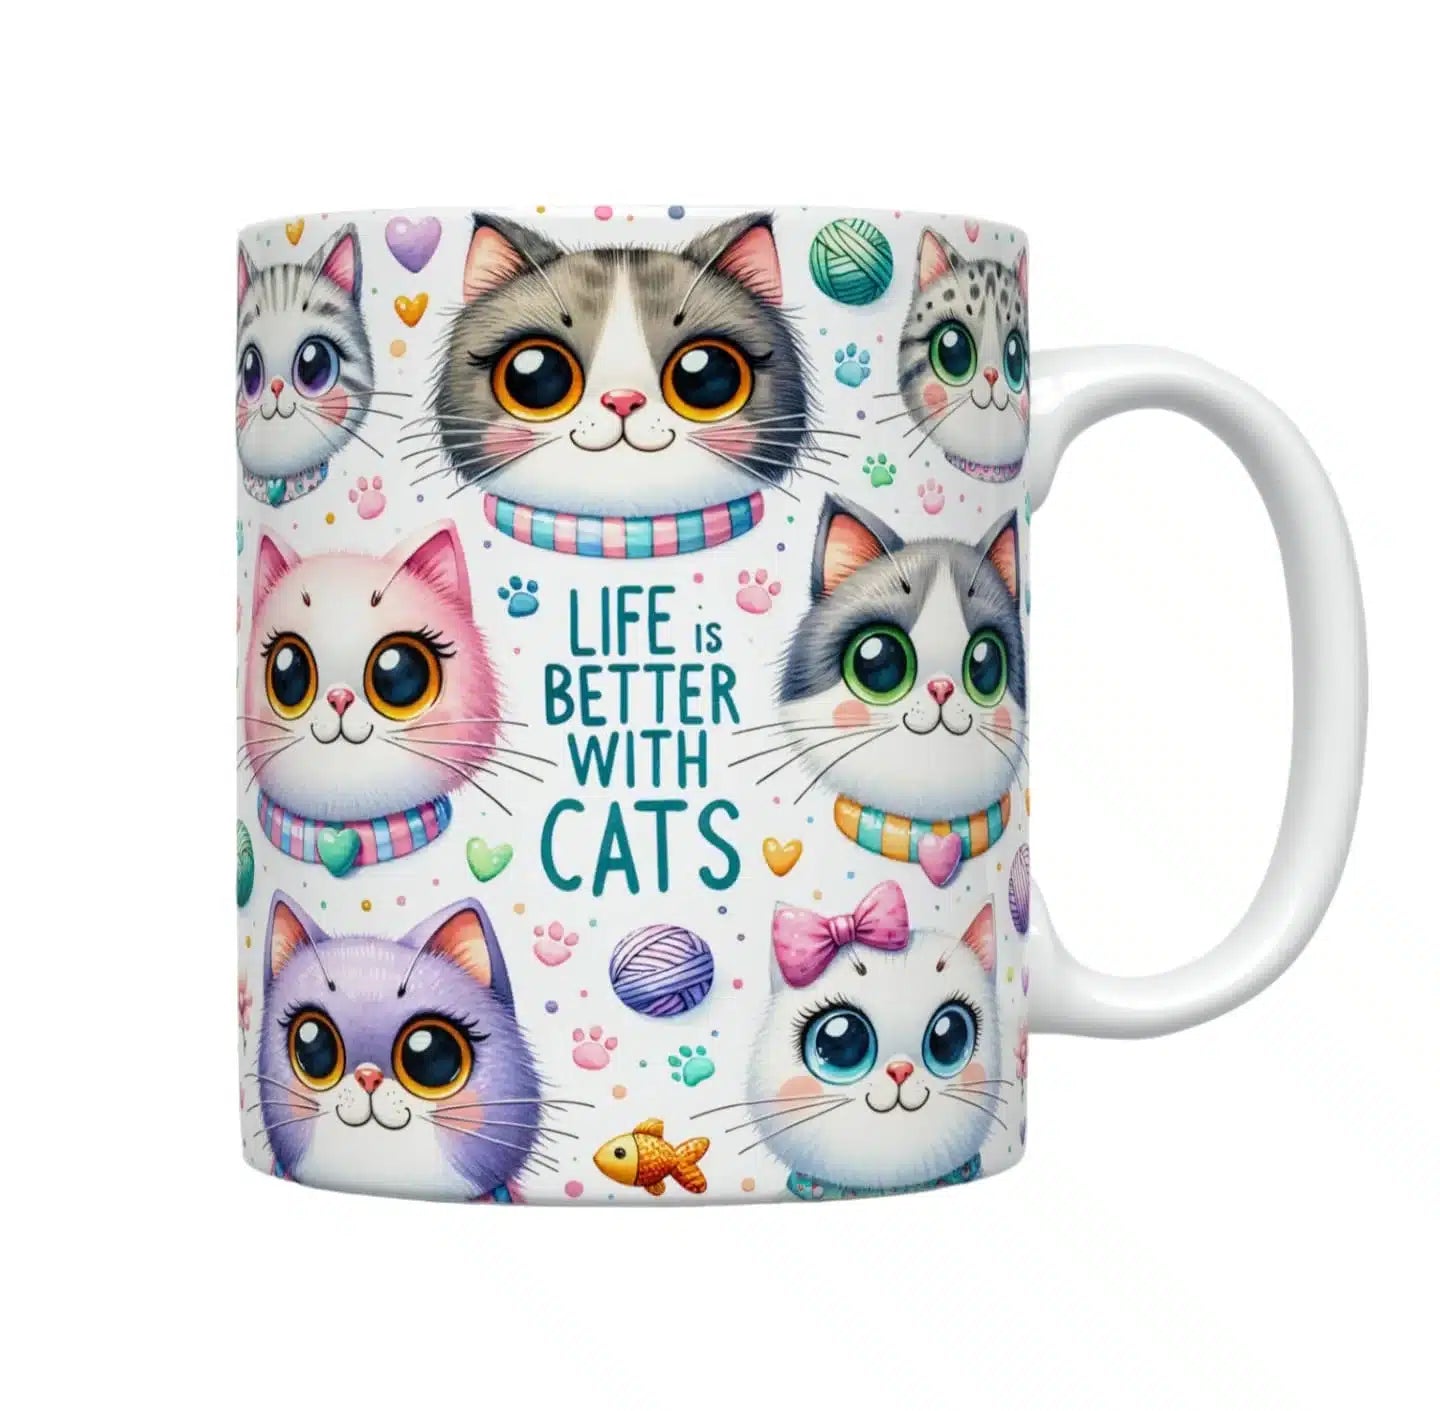 Cana personalizata, Life is better with cats, Ceramica, Alb, 350 ml